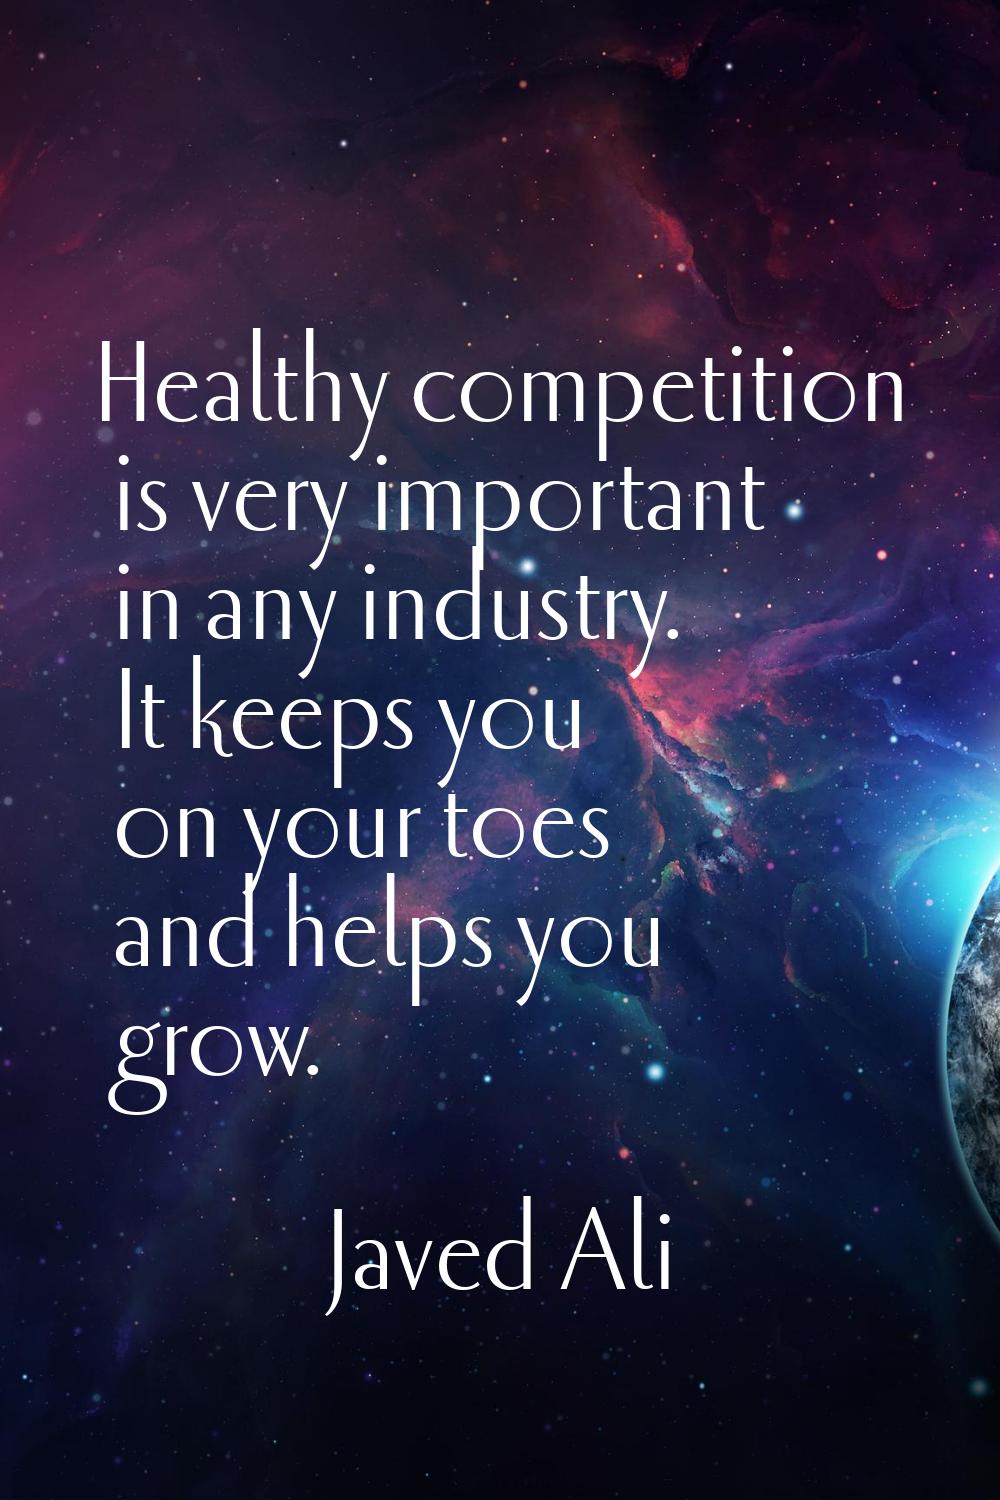 Healthy competition is very important in any industry. It keeps you on your toes and helps you grow